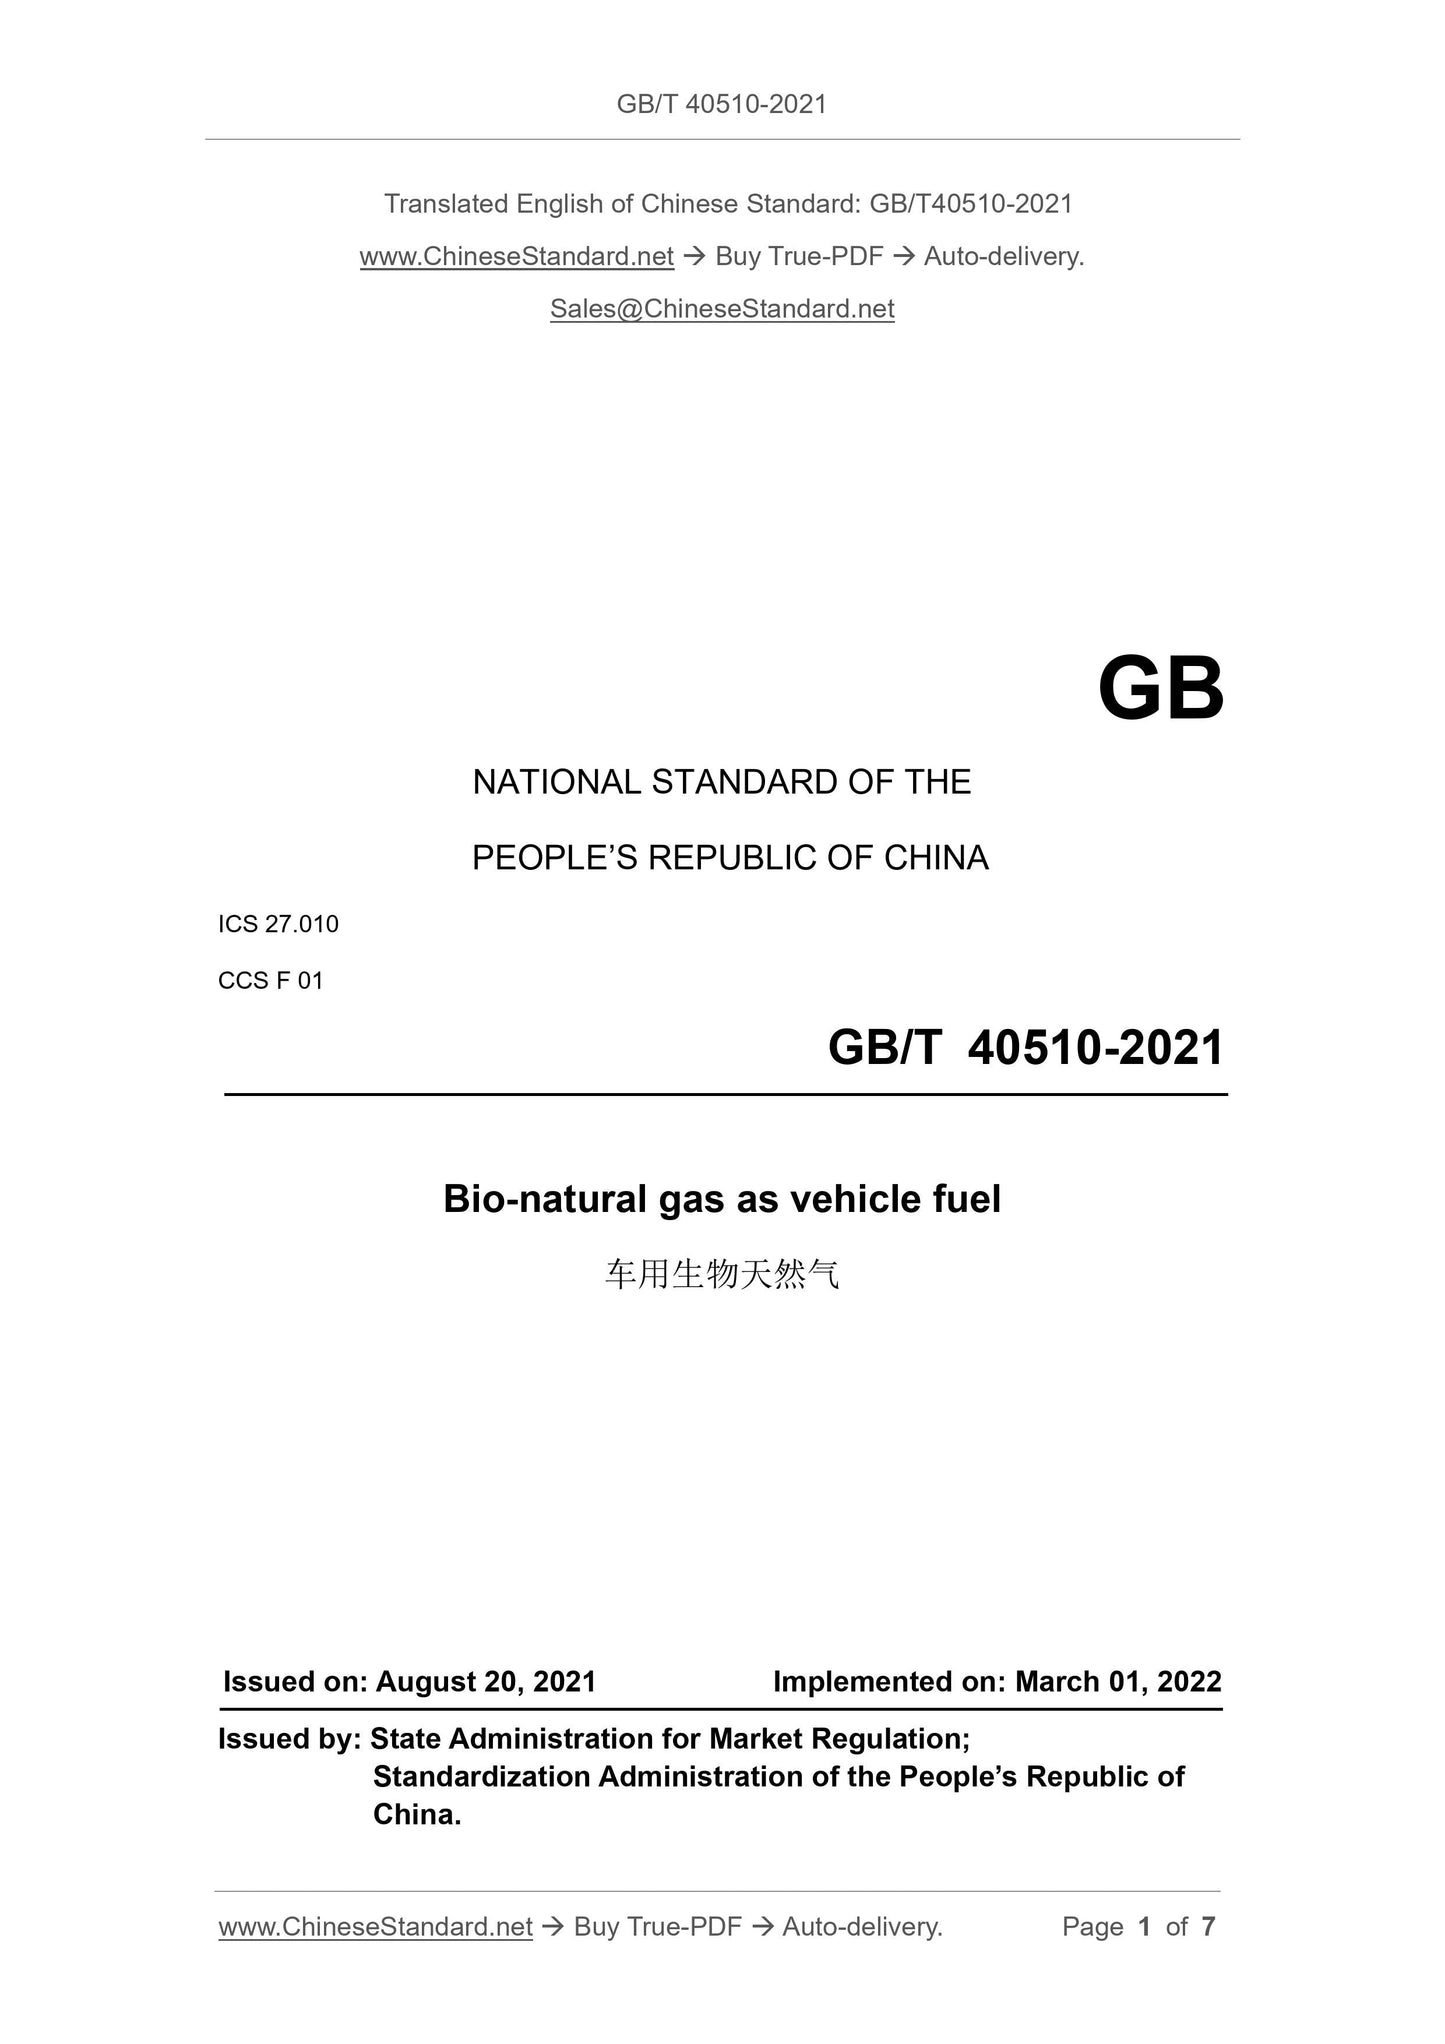 GB/T 40510-2021 Page 1